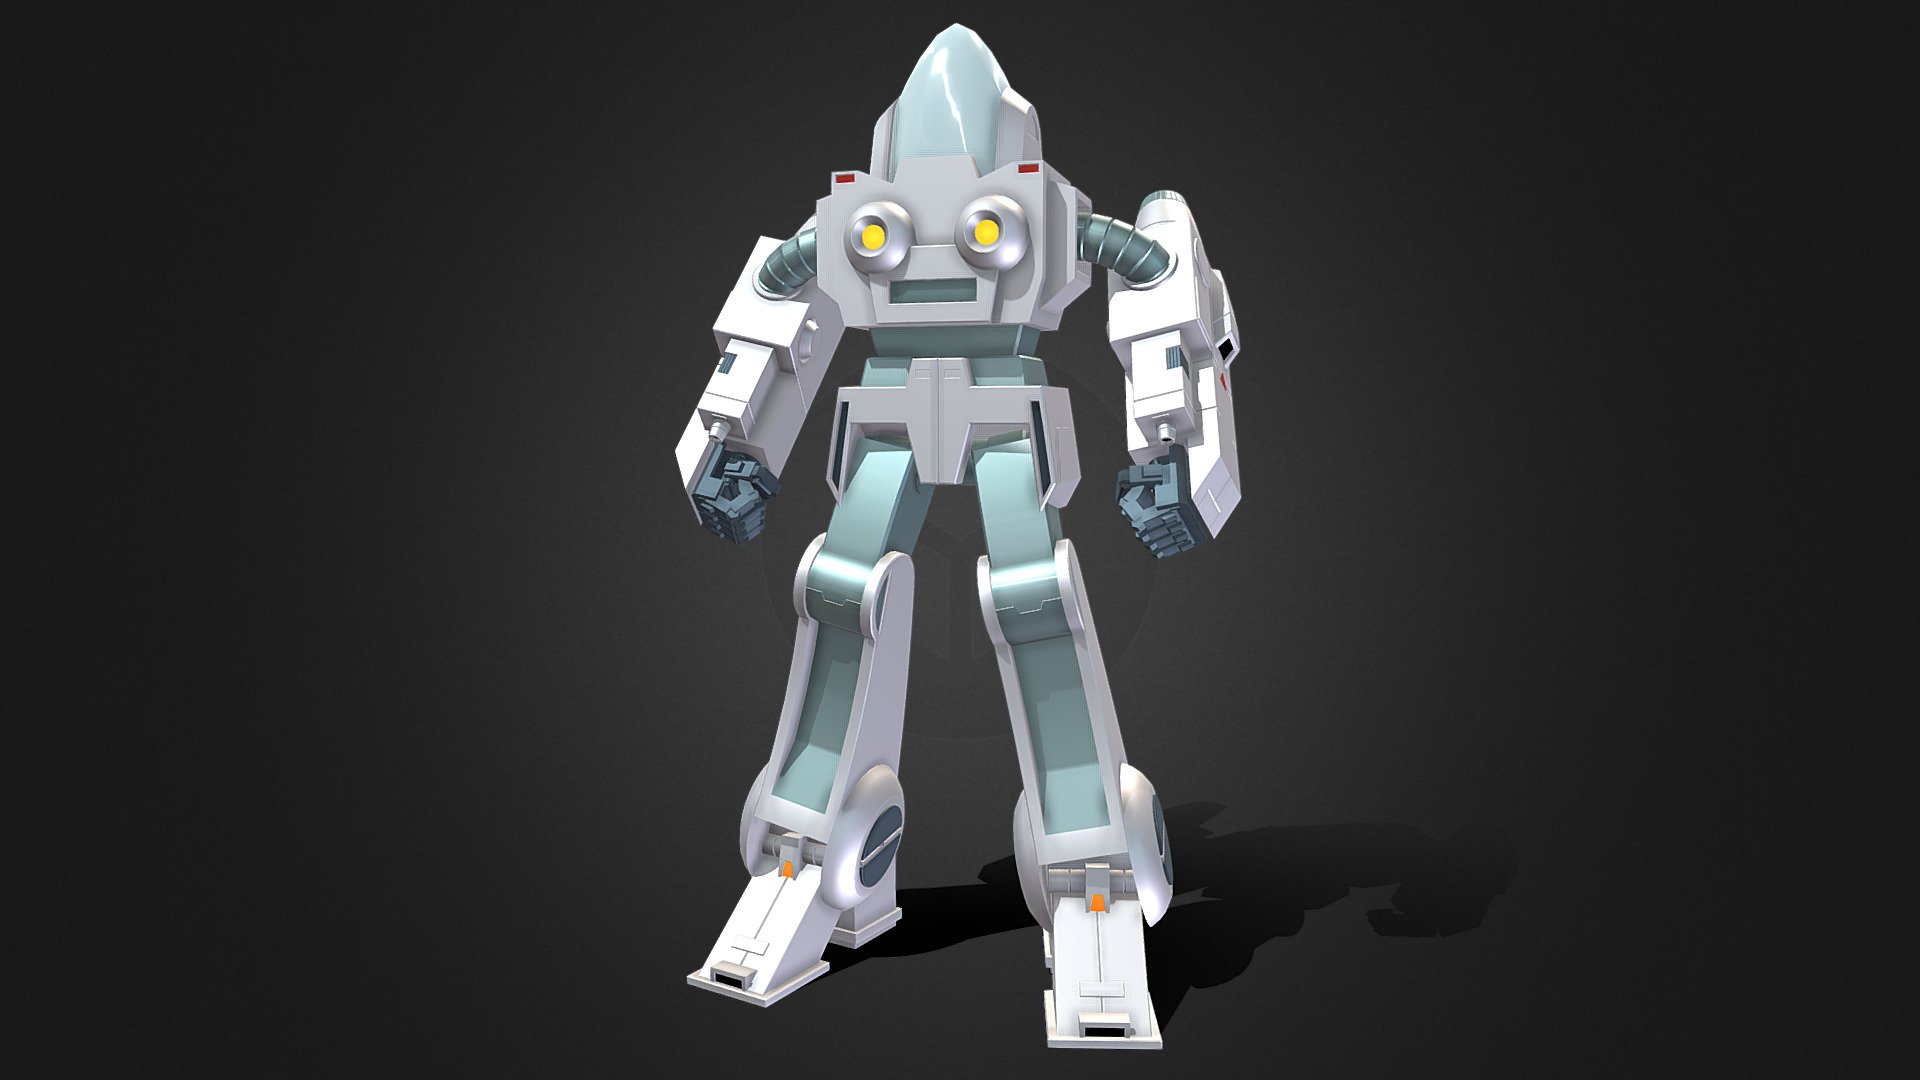 If you’re interested in purchasing any of my models, contact me @ andrewdisaacs@yahoo.com

An Autobot-made human Exo-Suit from Transformers The Movie (1986) and Season 3 of the Transformers G1 cartoon.

Made by myself in 3DS Max 3d model